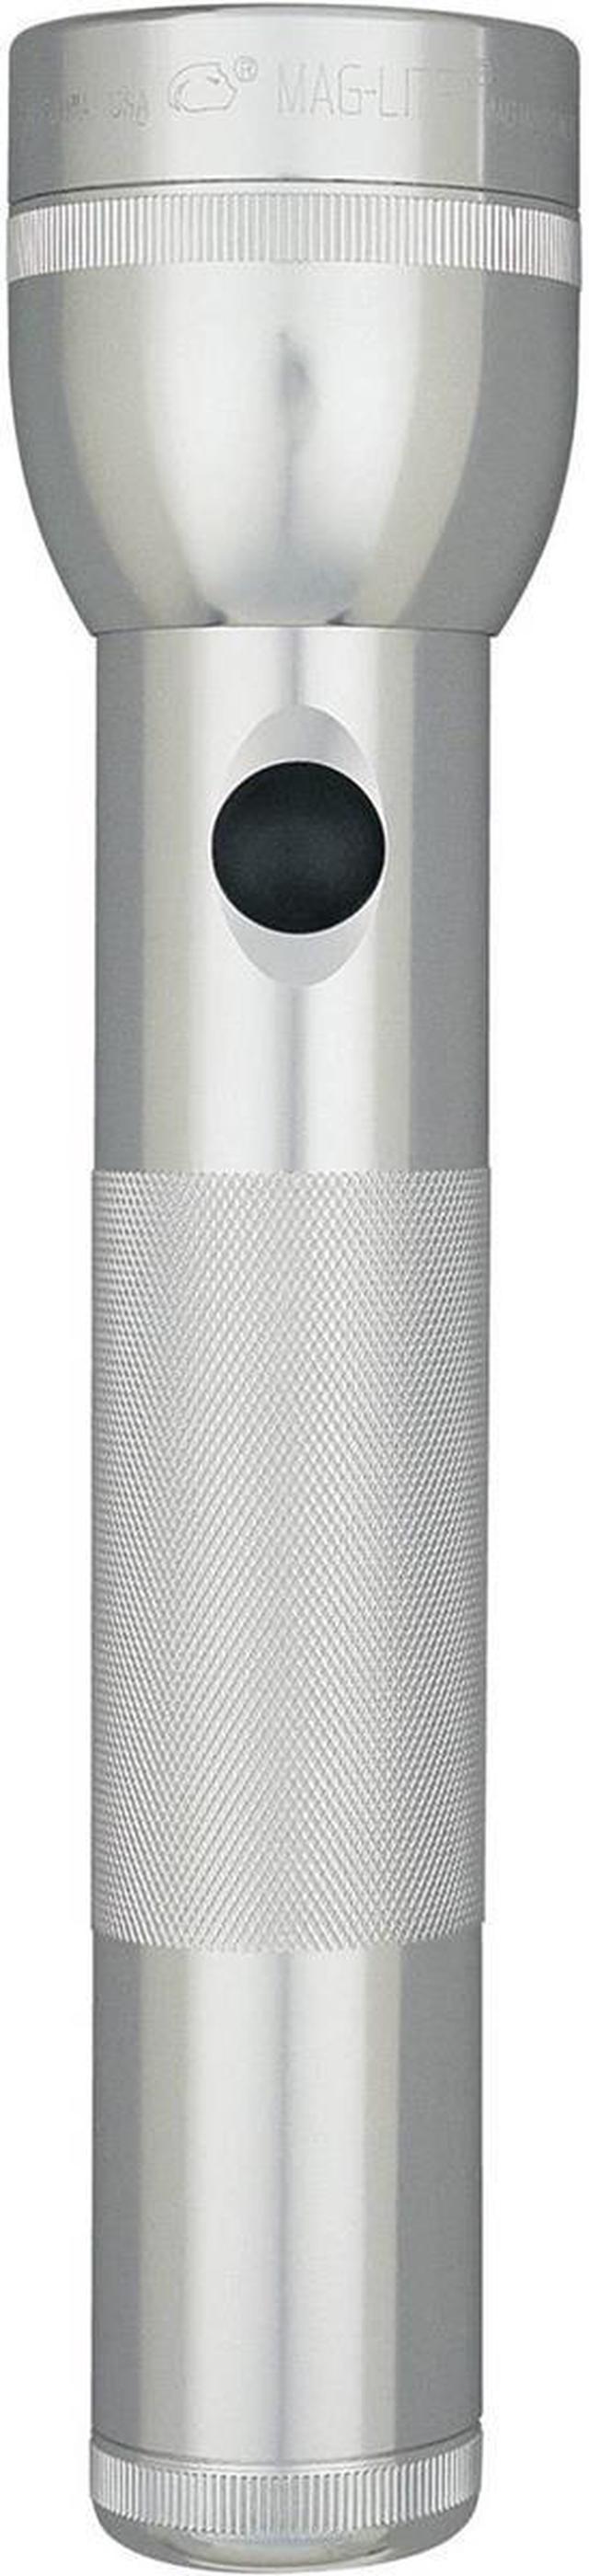 Maglite 2-Cell D Blister Silver